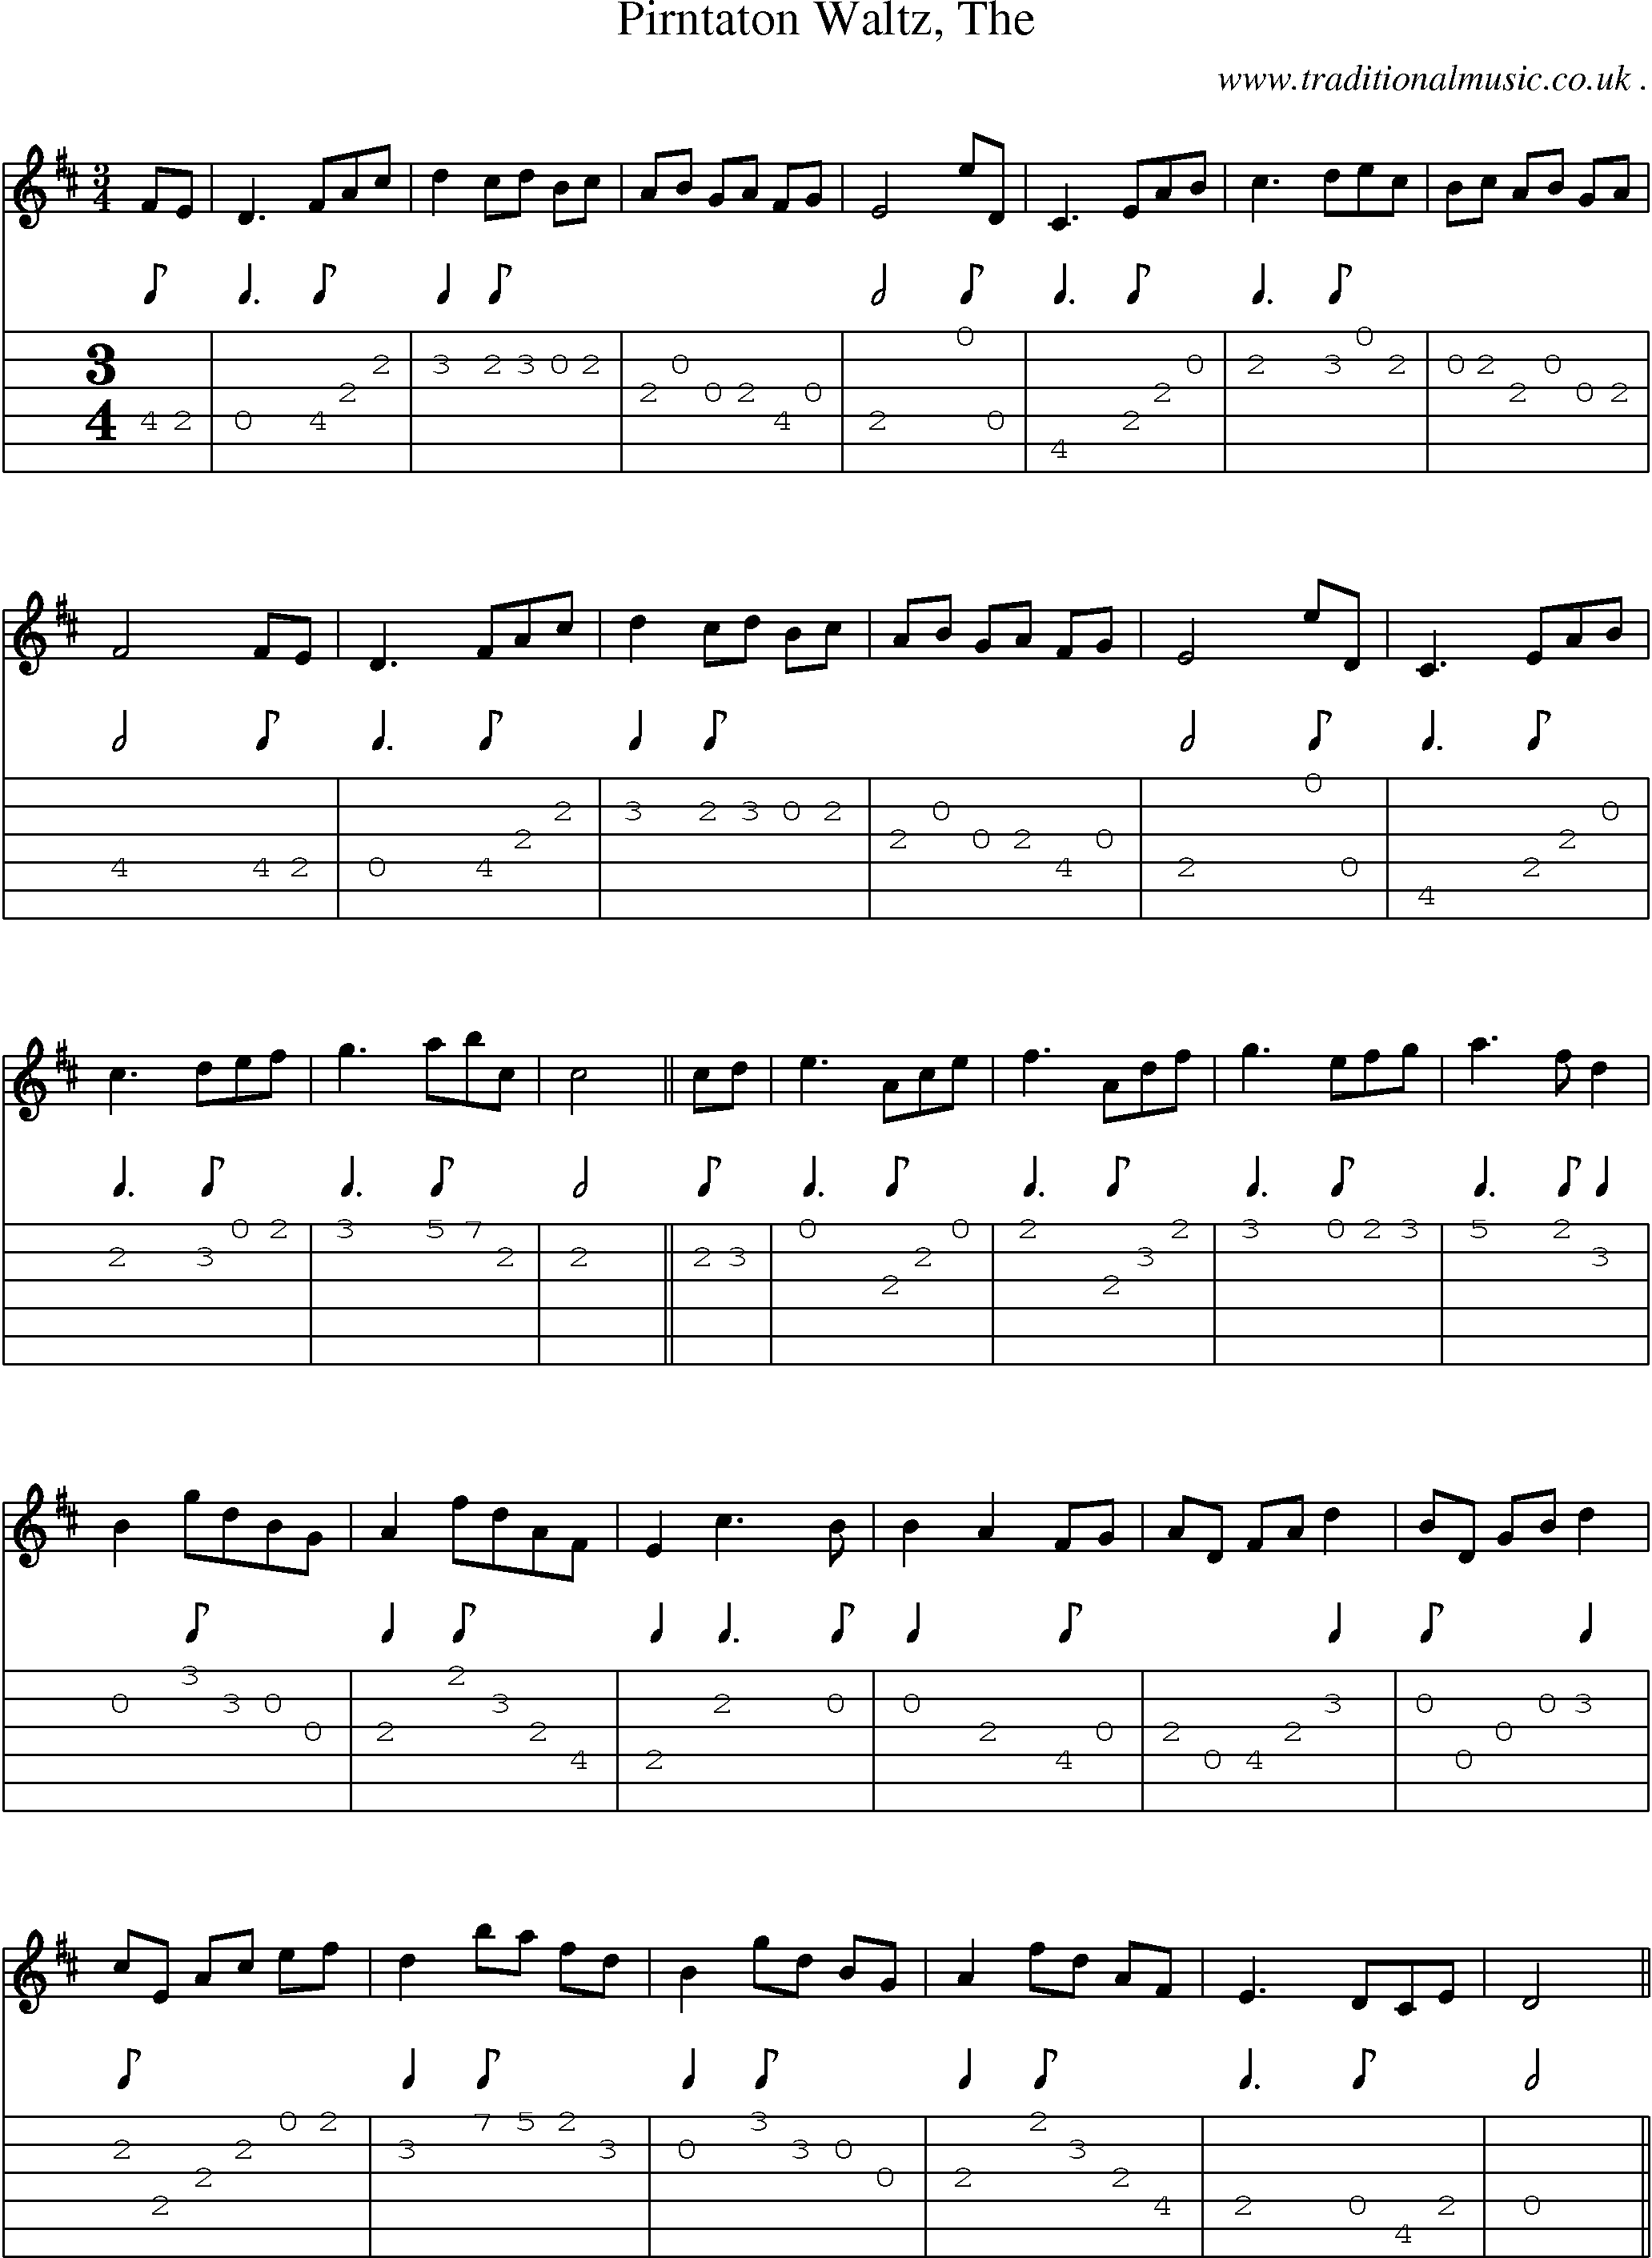 Music Score and Guitar Tabs for Pirntaton Waltz The